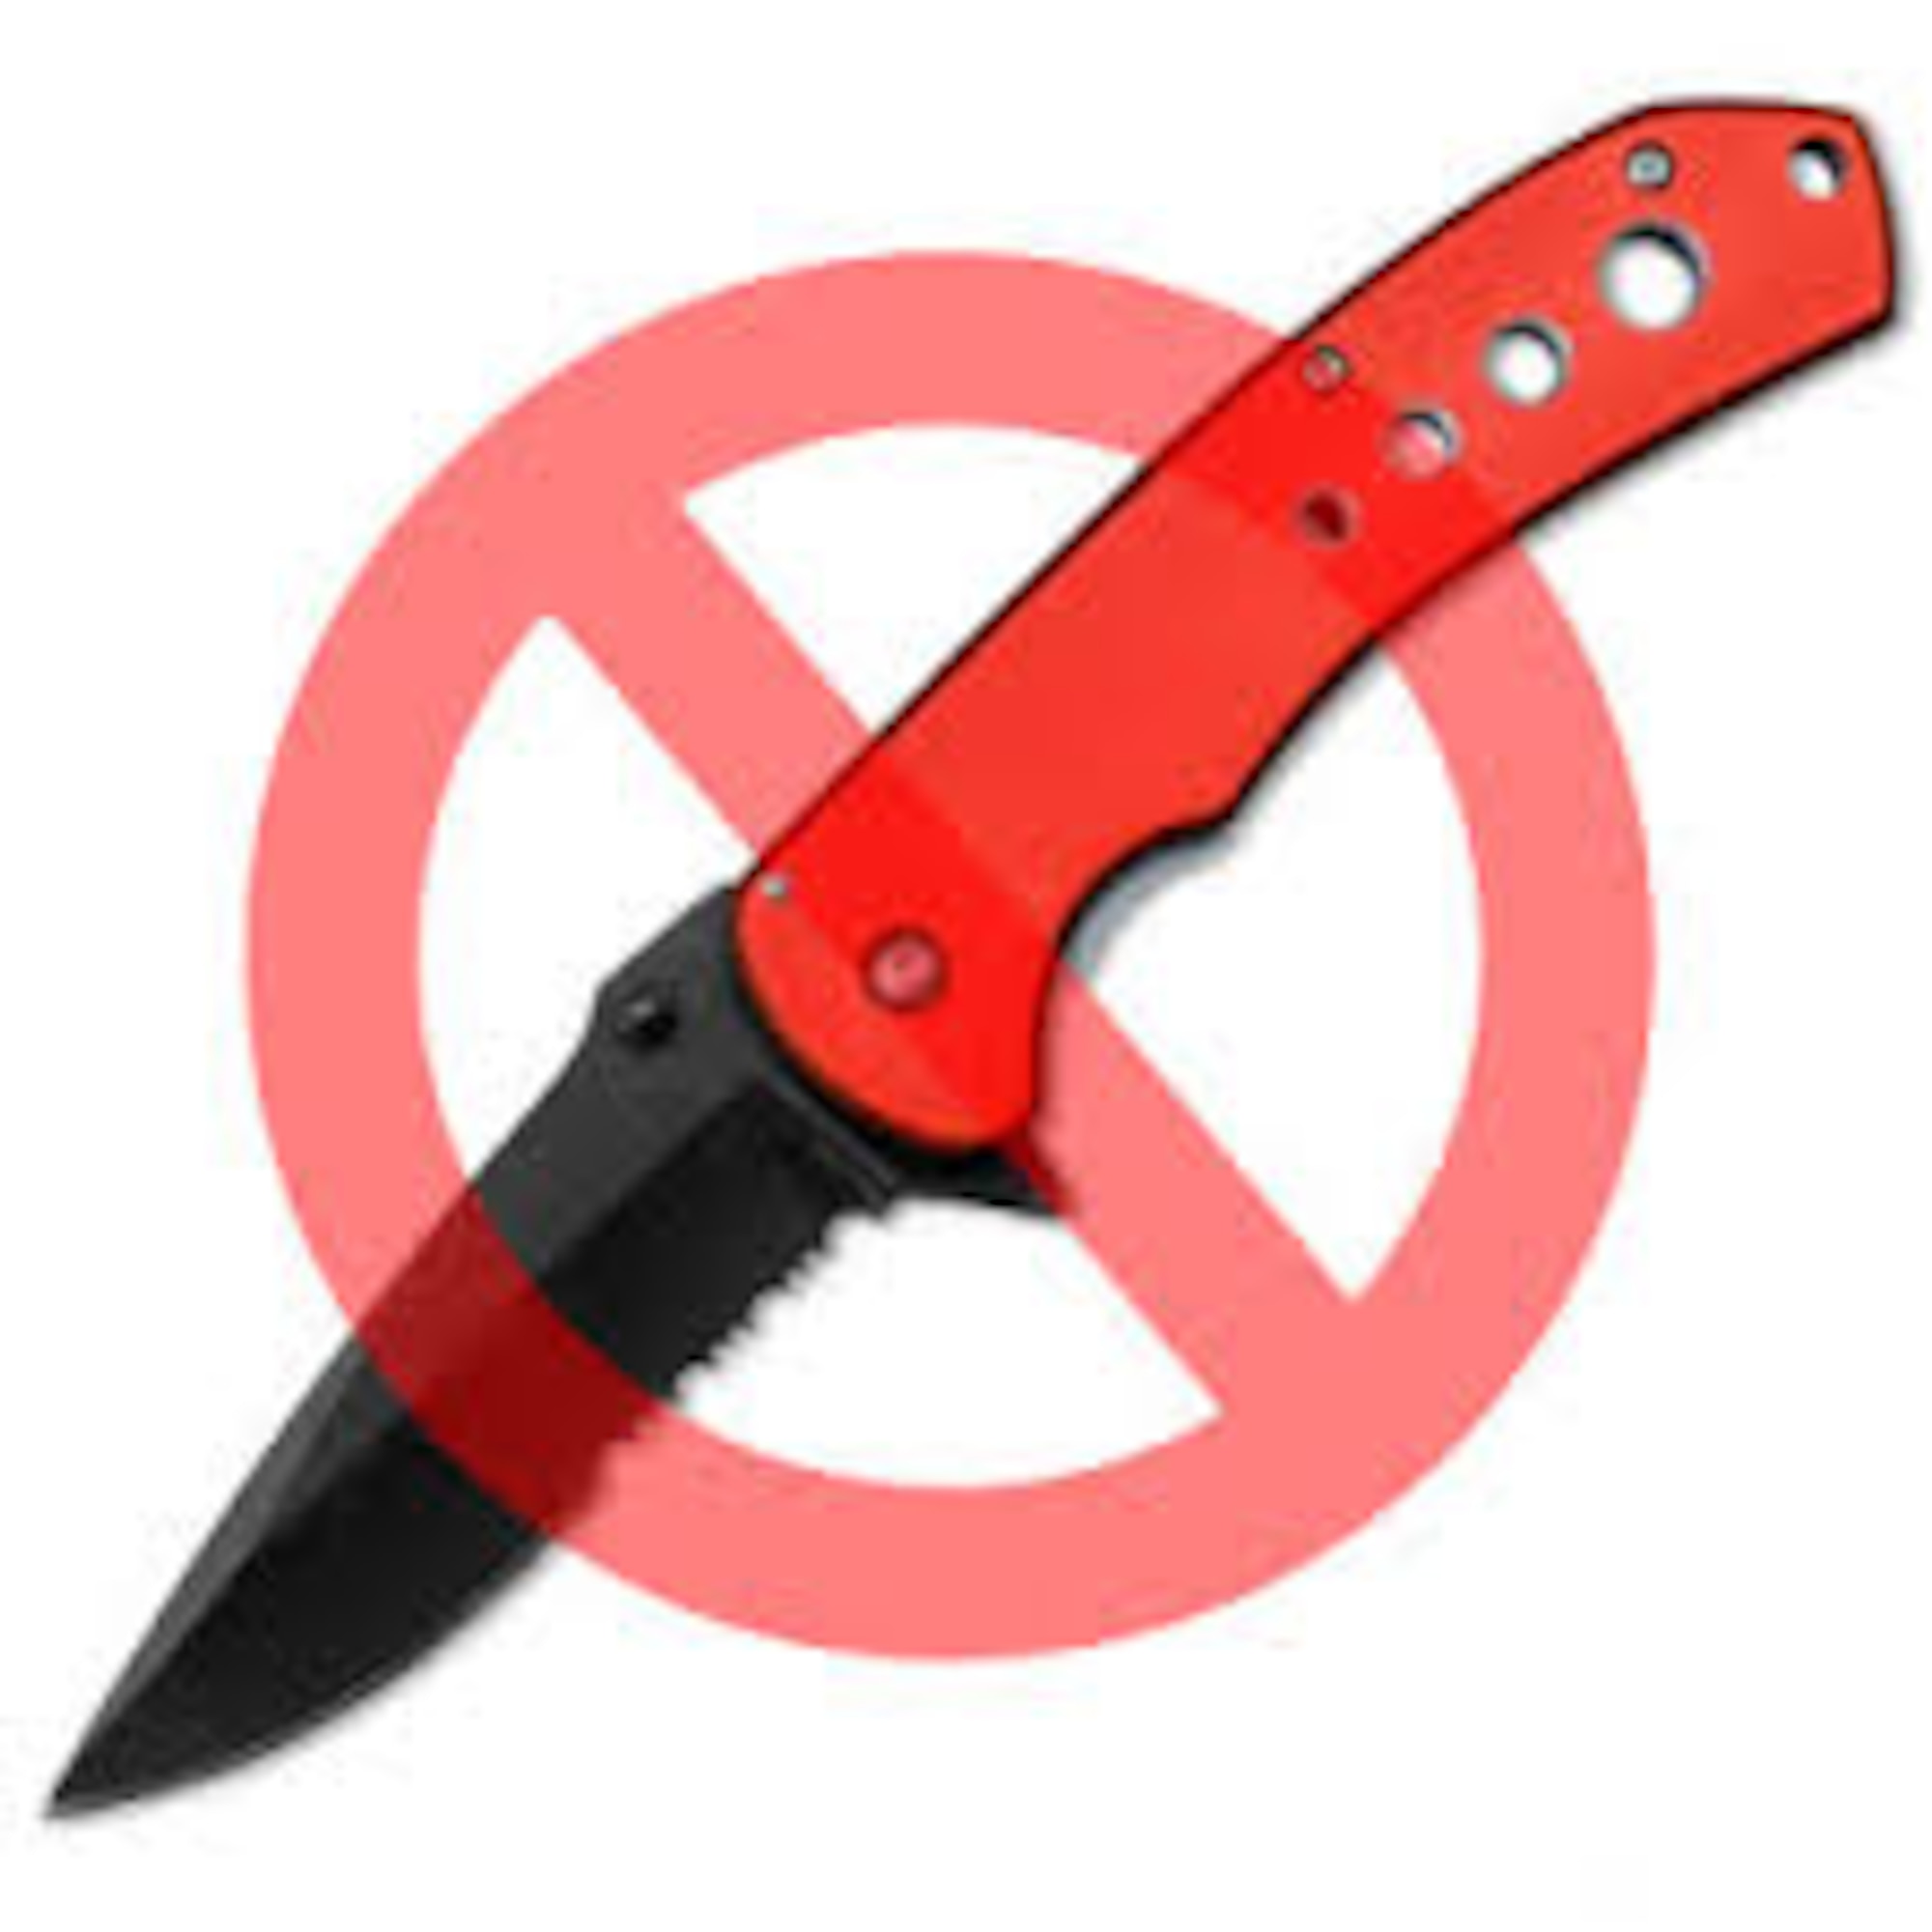 For further guidance on the types of knives banned in the UK, please contact your local police department or the 48th Security Forces Squadron at 01638522333